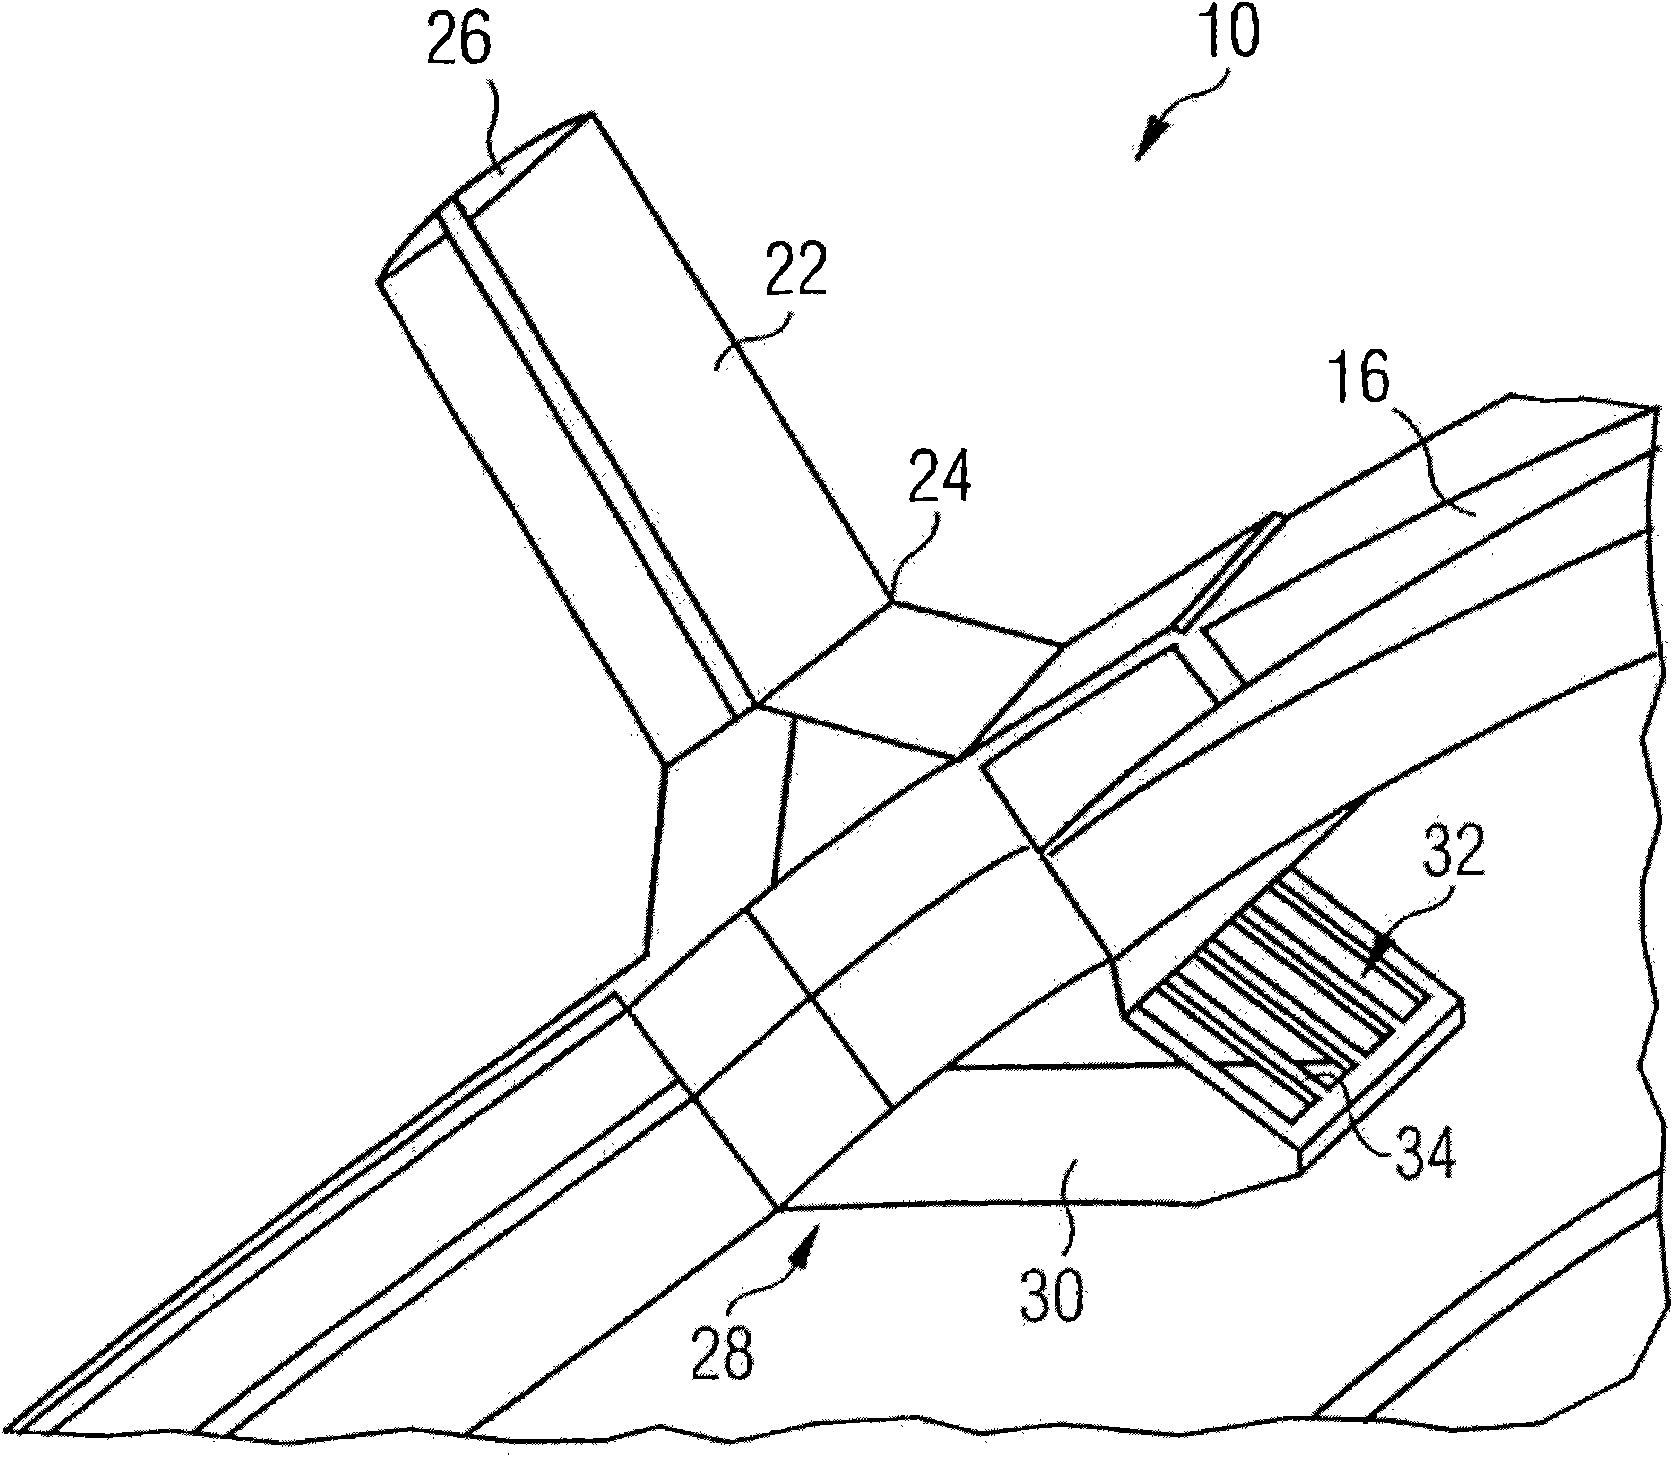 System and method for ventilating explosive regions of an aircraft